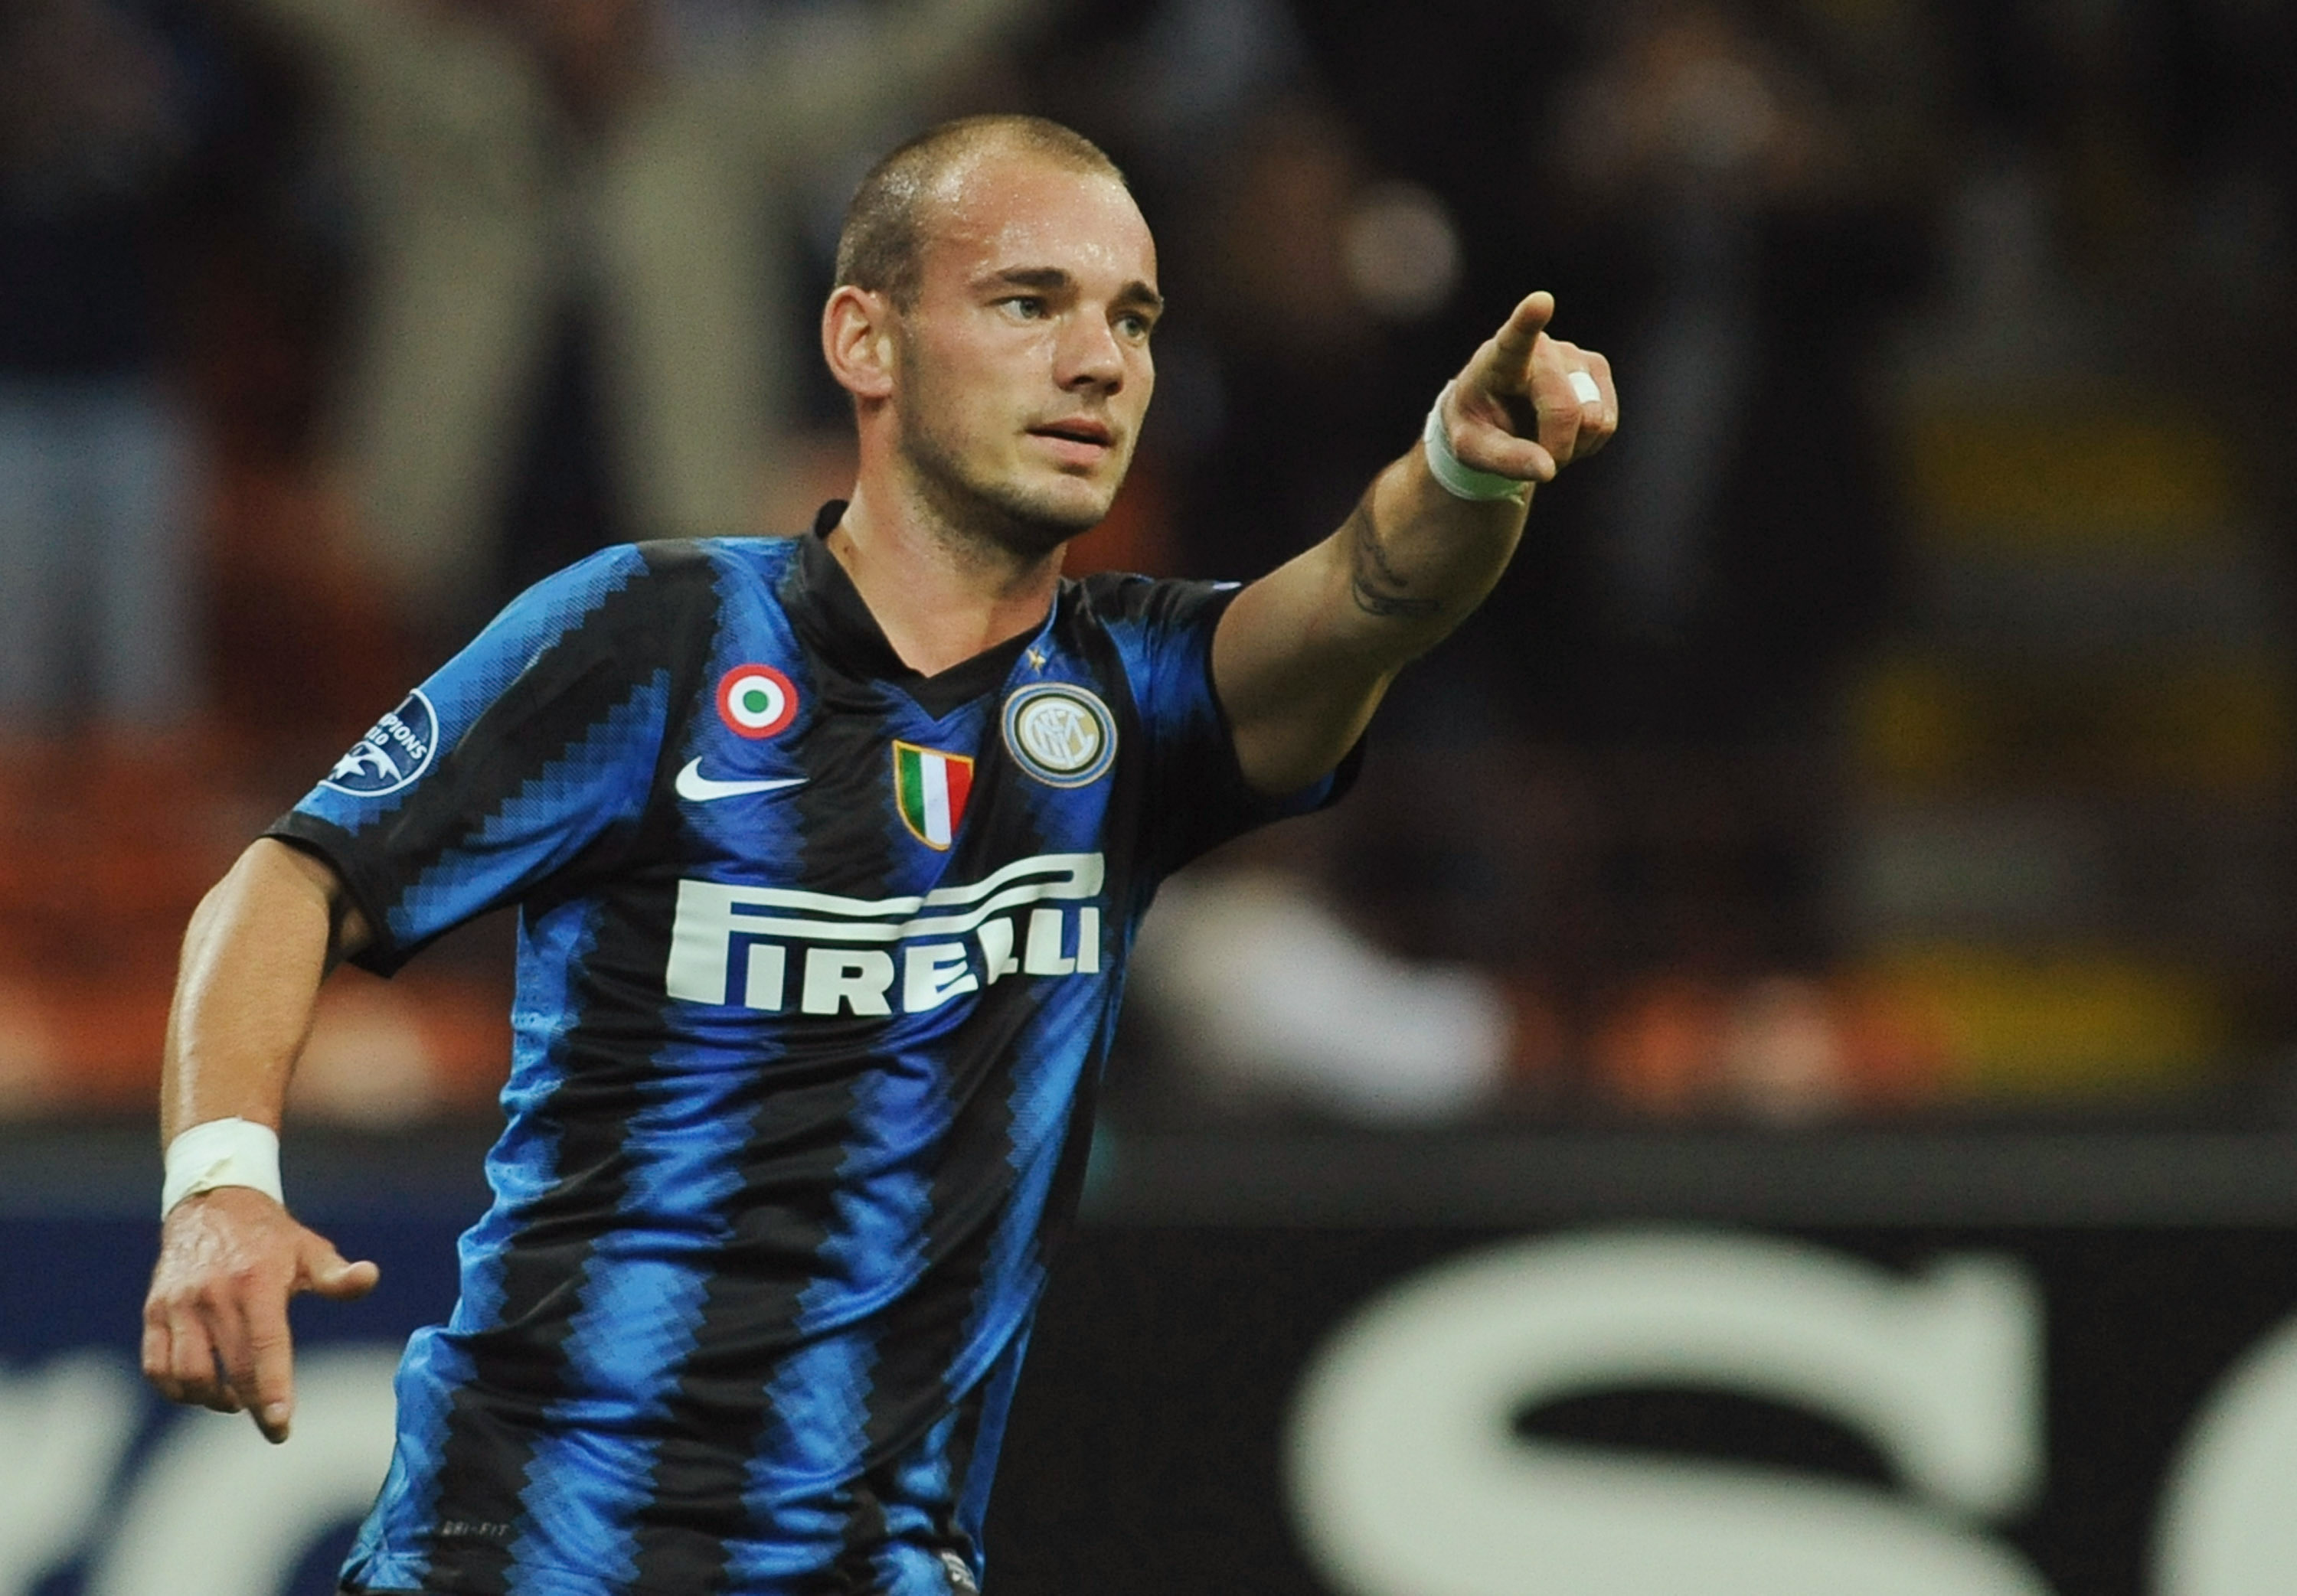 MILAN, ITALY - SEPTEMBER 29:  Wesley Sneijder of FC Internazionale Milano celebrates his goal during the UEFA Champions League group A match between FC Internazionale Milano and SV Werder Bremen at Stadio Giuseppe Meazza on September 29, 2010 in Milan, It